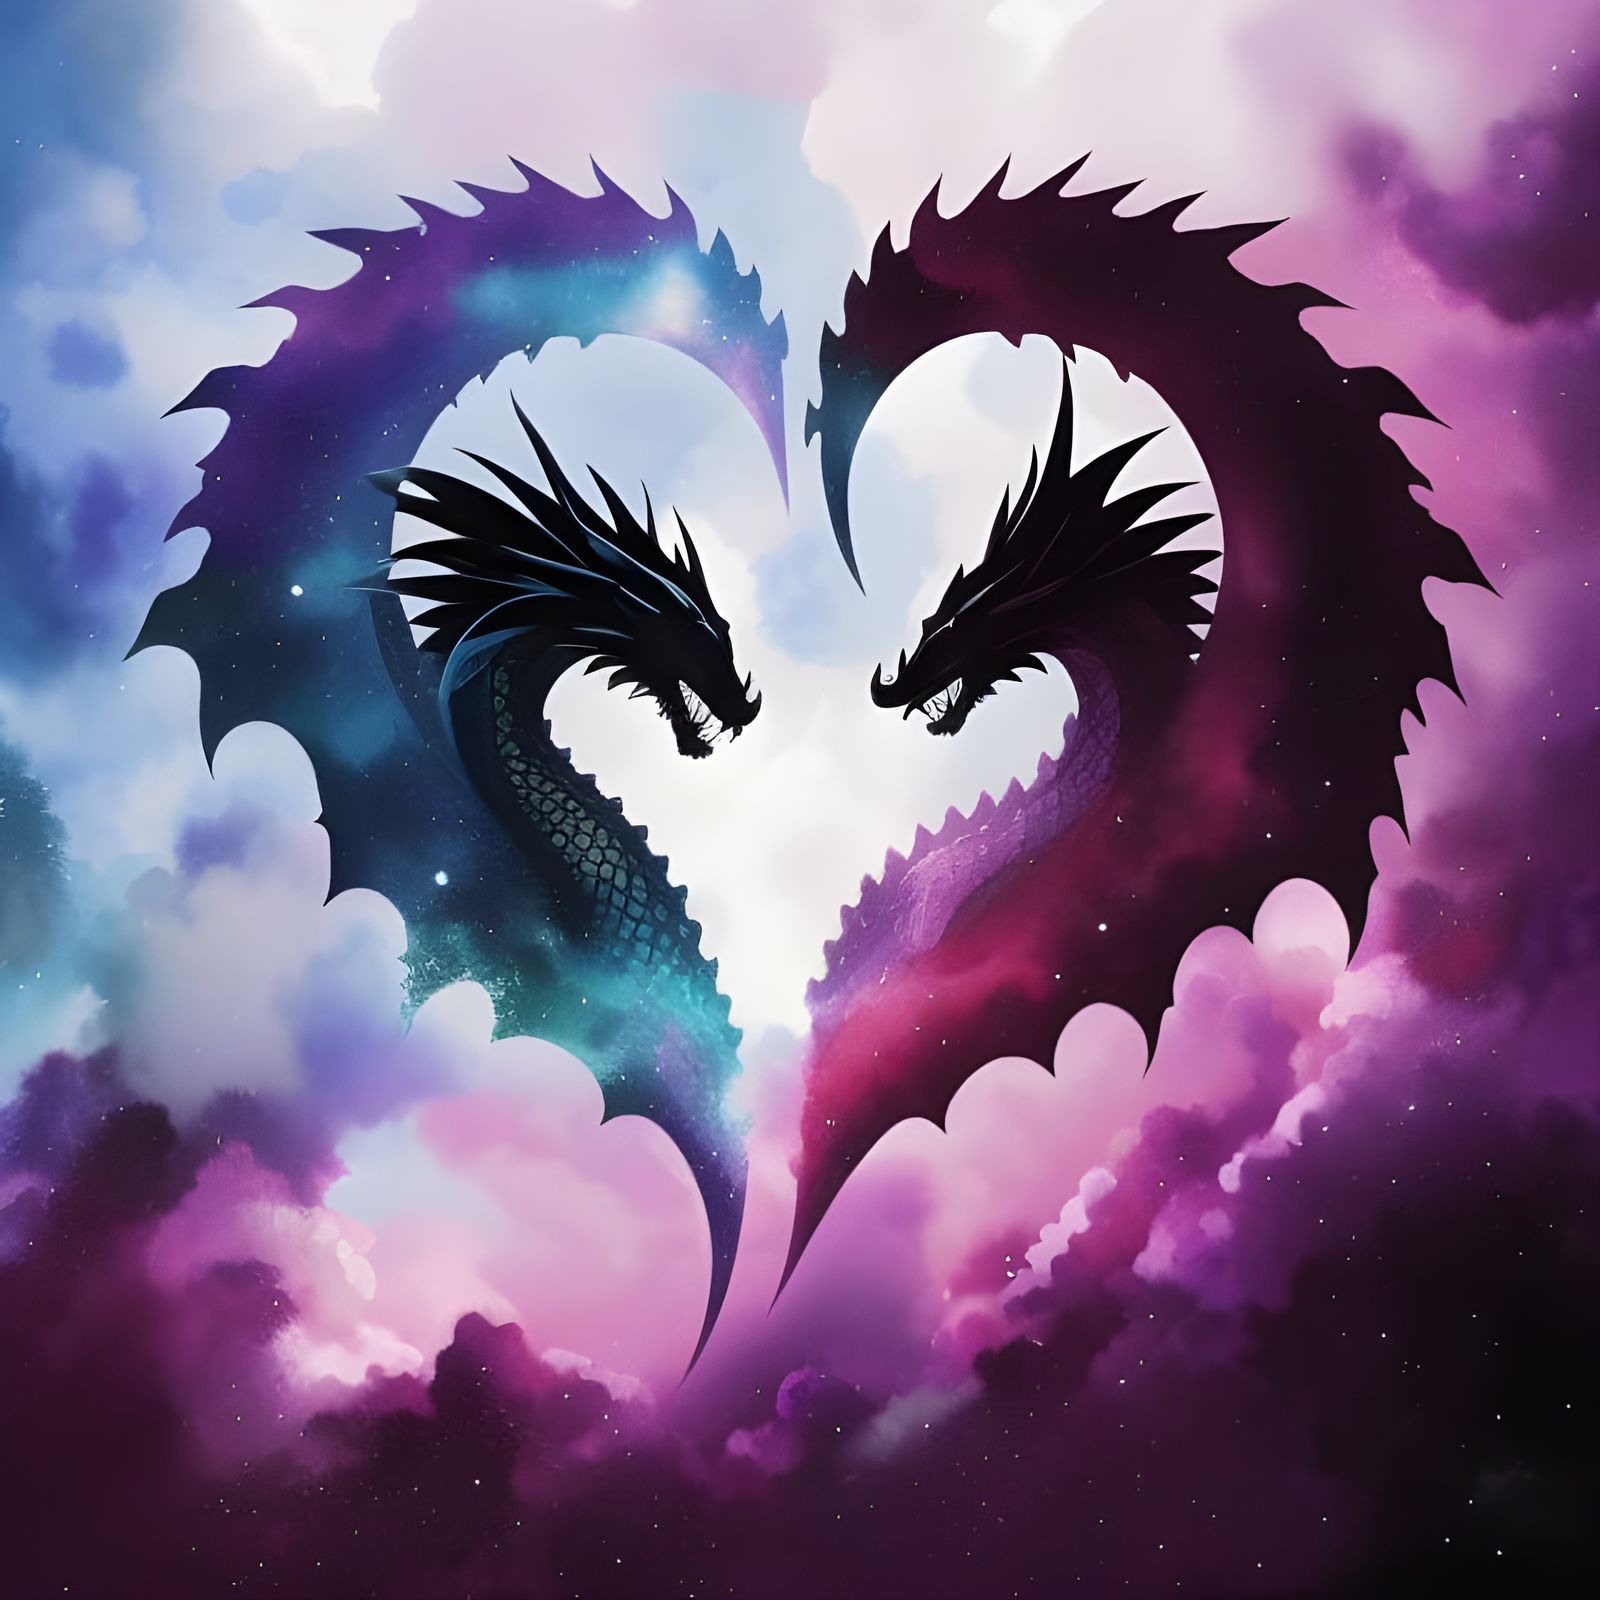 dragons in love with humans